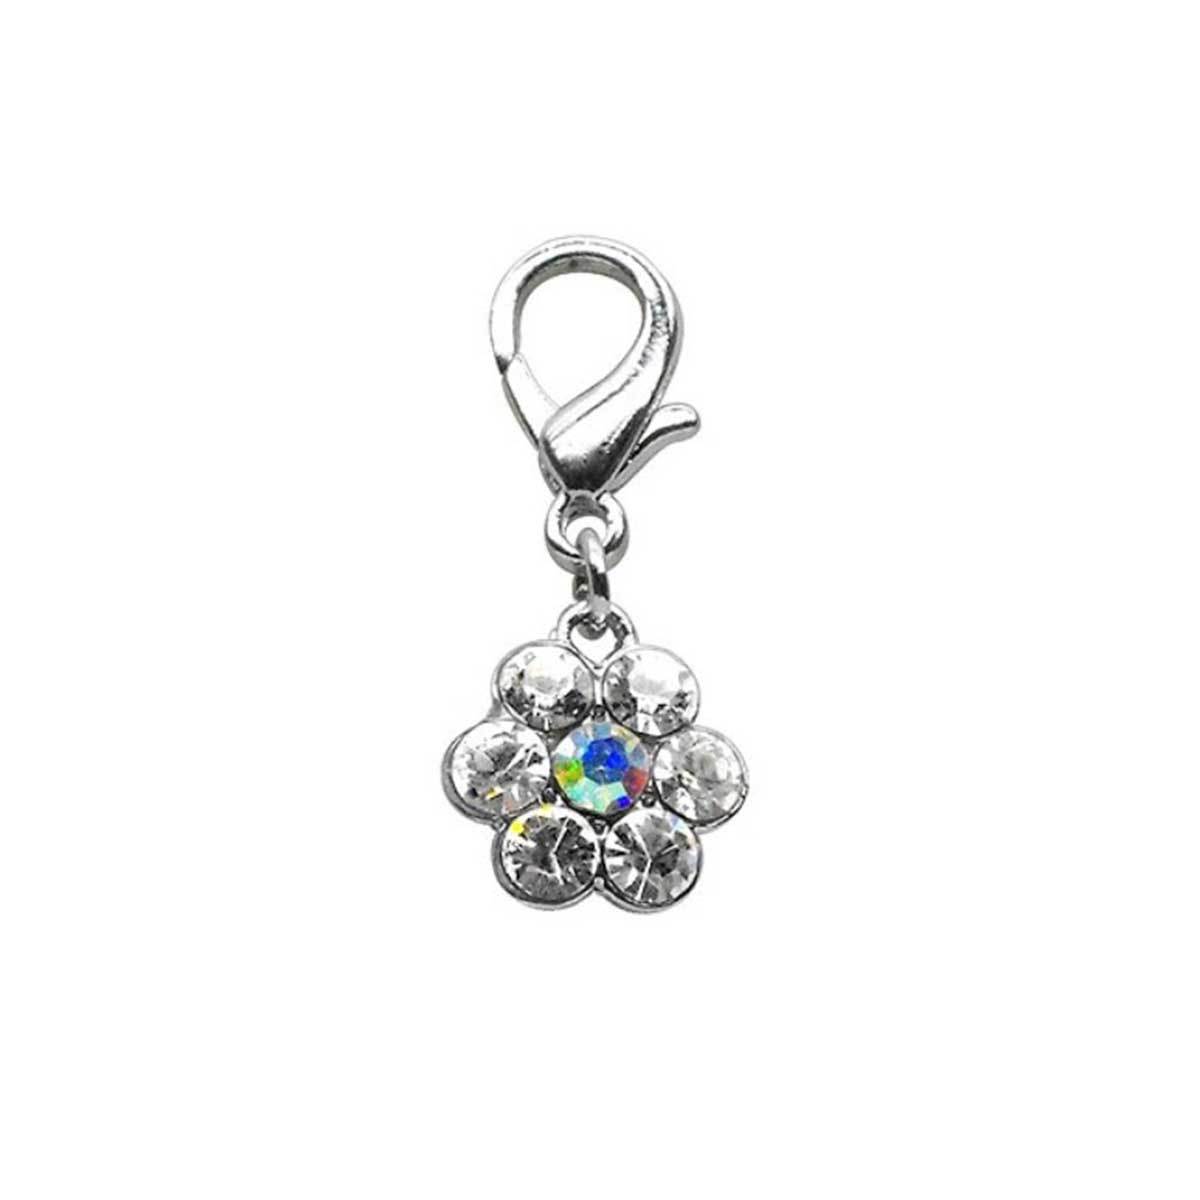 Lobster Claw Flower Charm with Clear Cystals | Pawlicious & Company